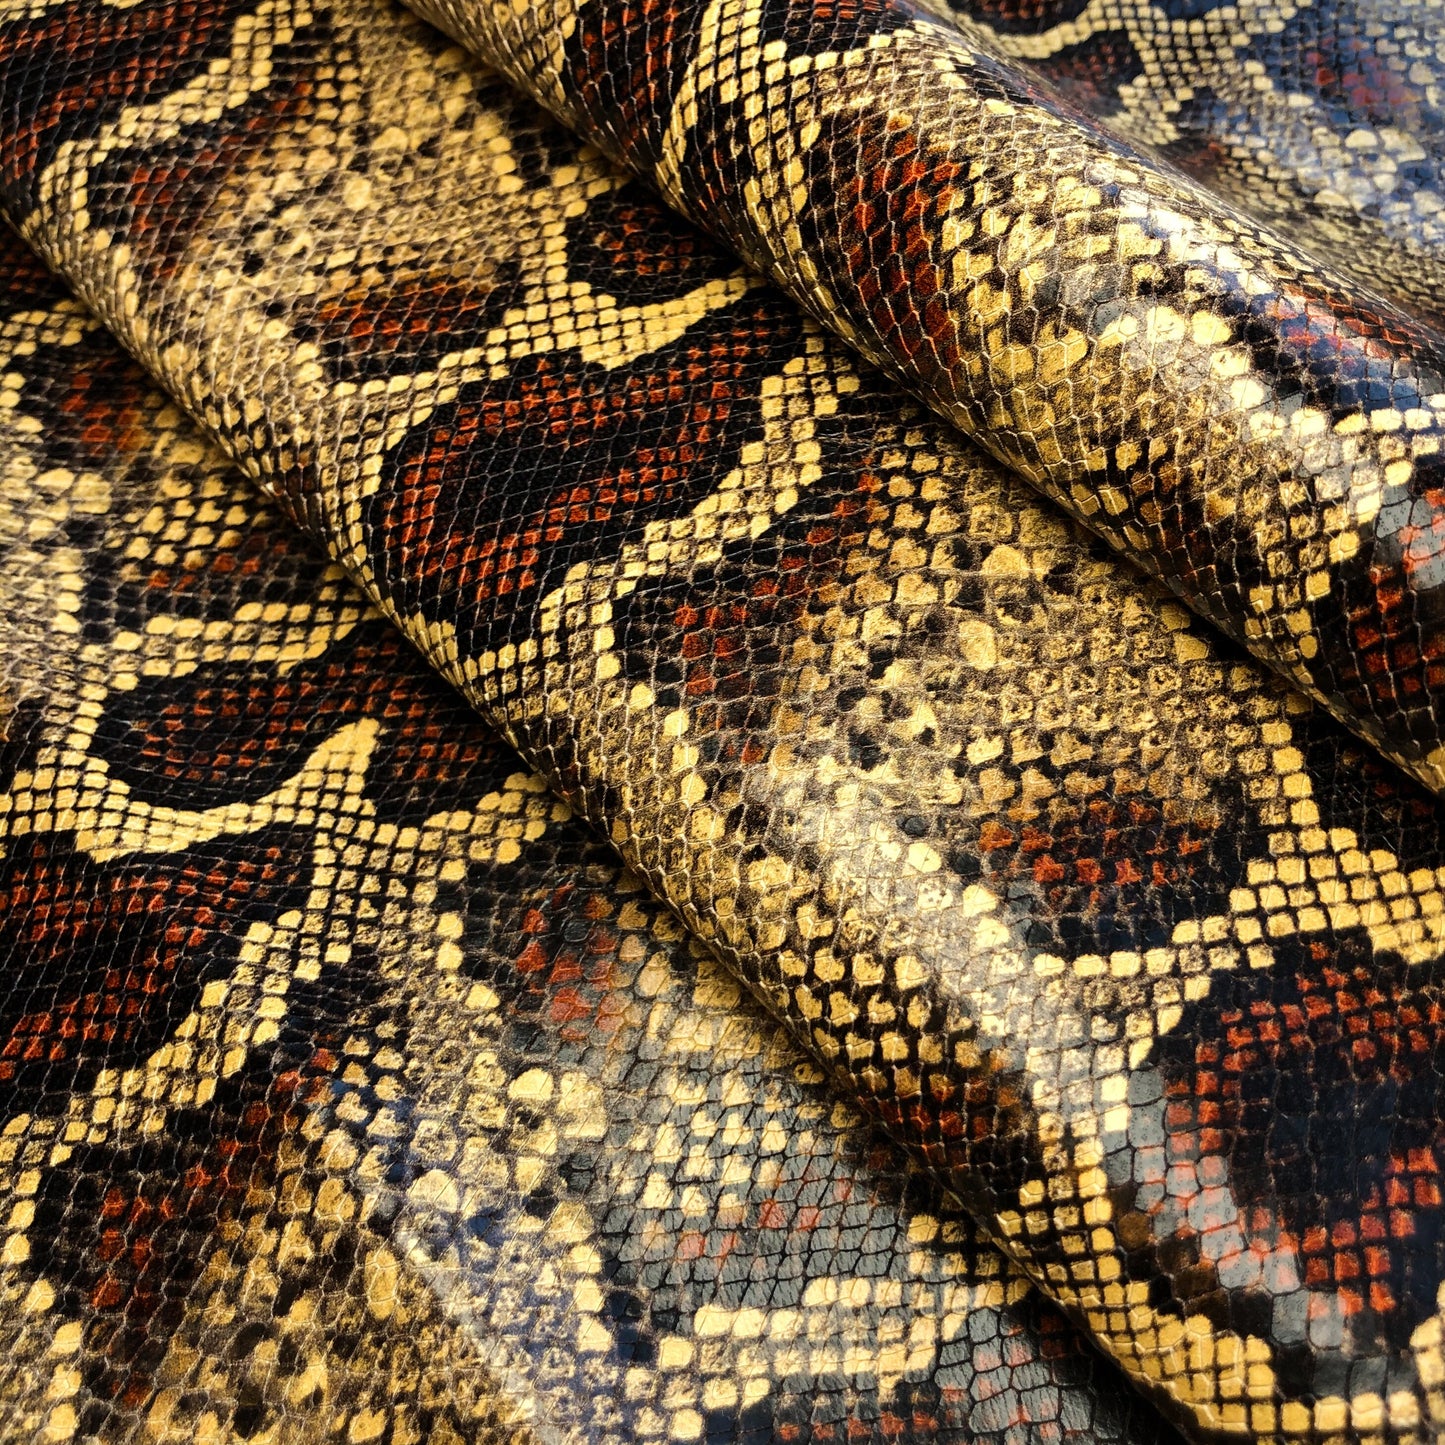 Realistic Snake Print Lambskin Leather With Embossed Scales Bundle of 7 Full Skin